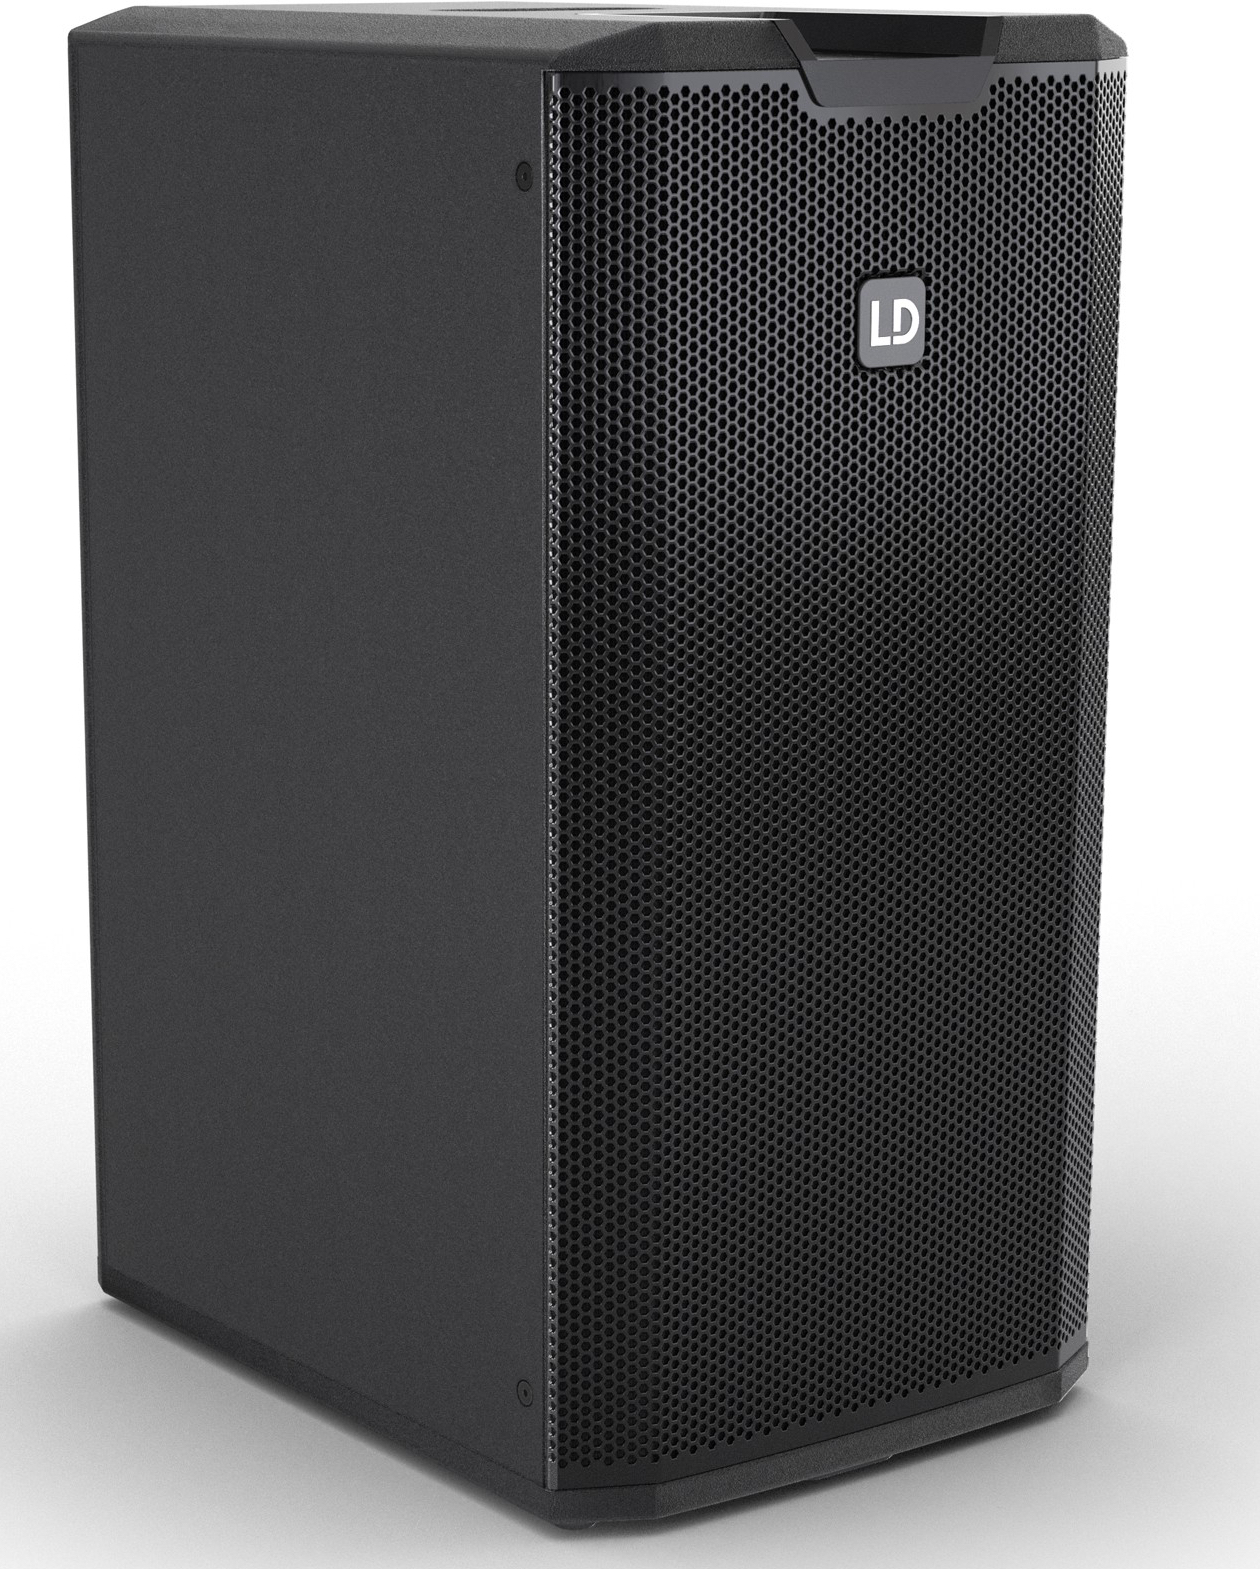 Ld Systems Maui 11 G3 Sub - Kolommensysteem - Main picture